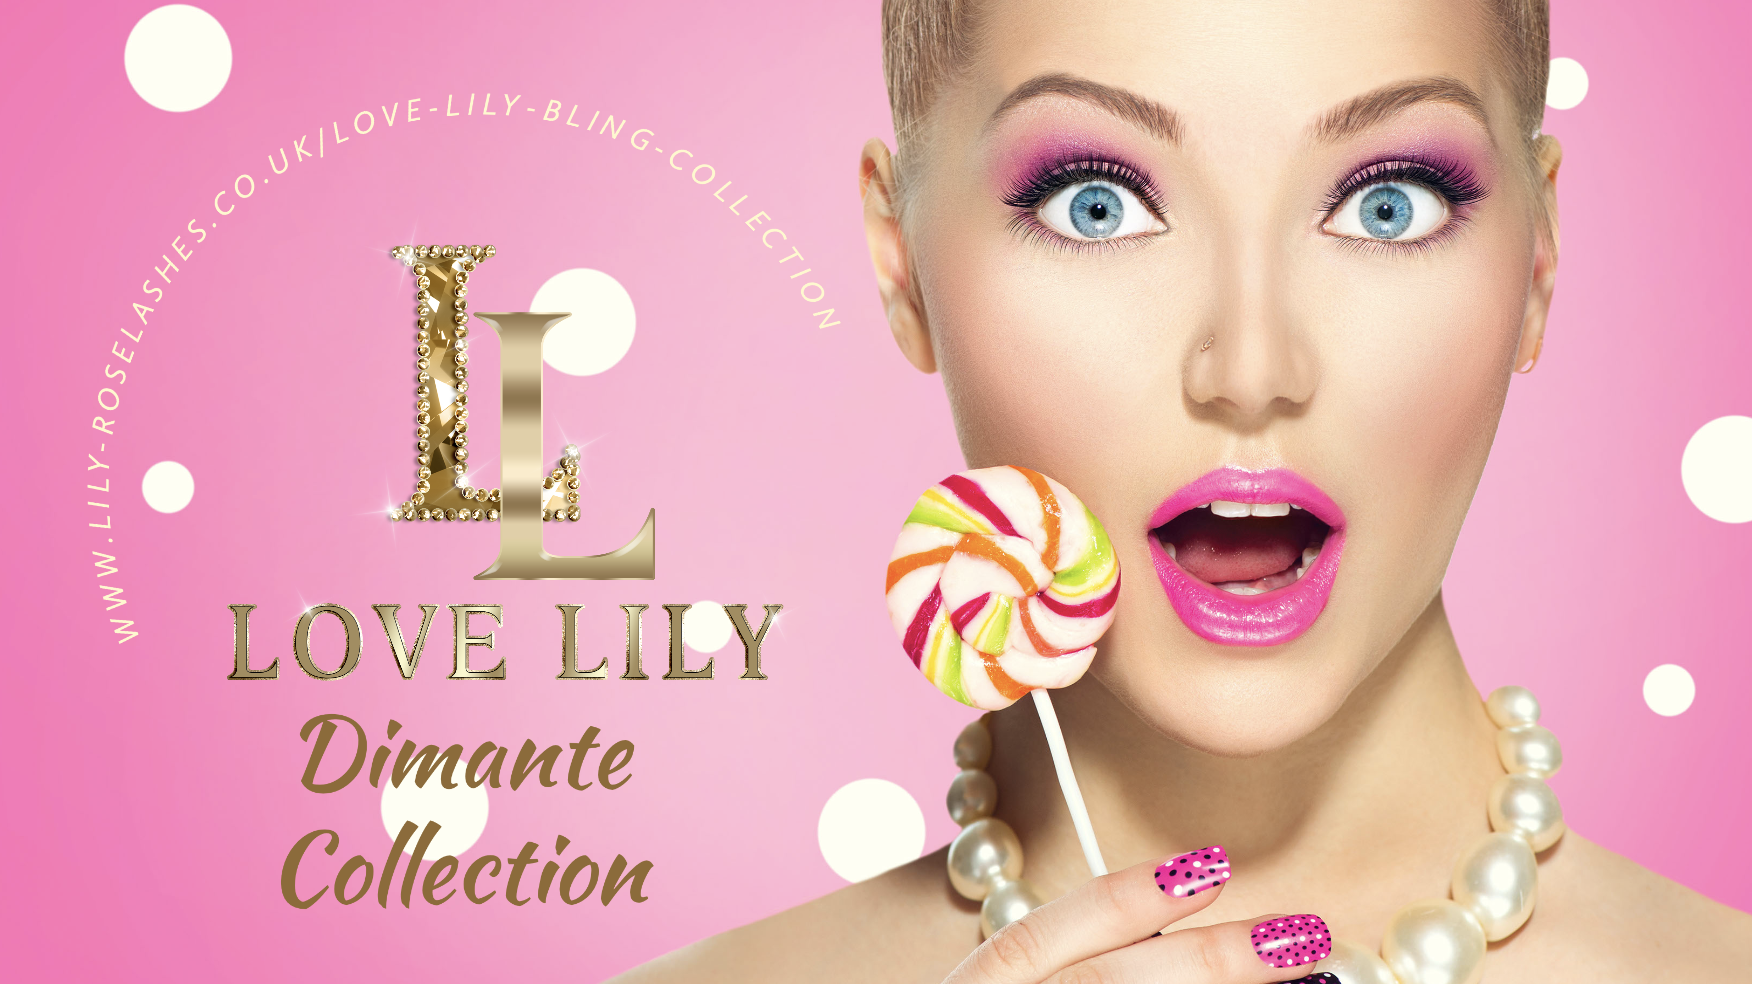 LOVE LILY DIMANTE COLLECTIONS